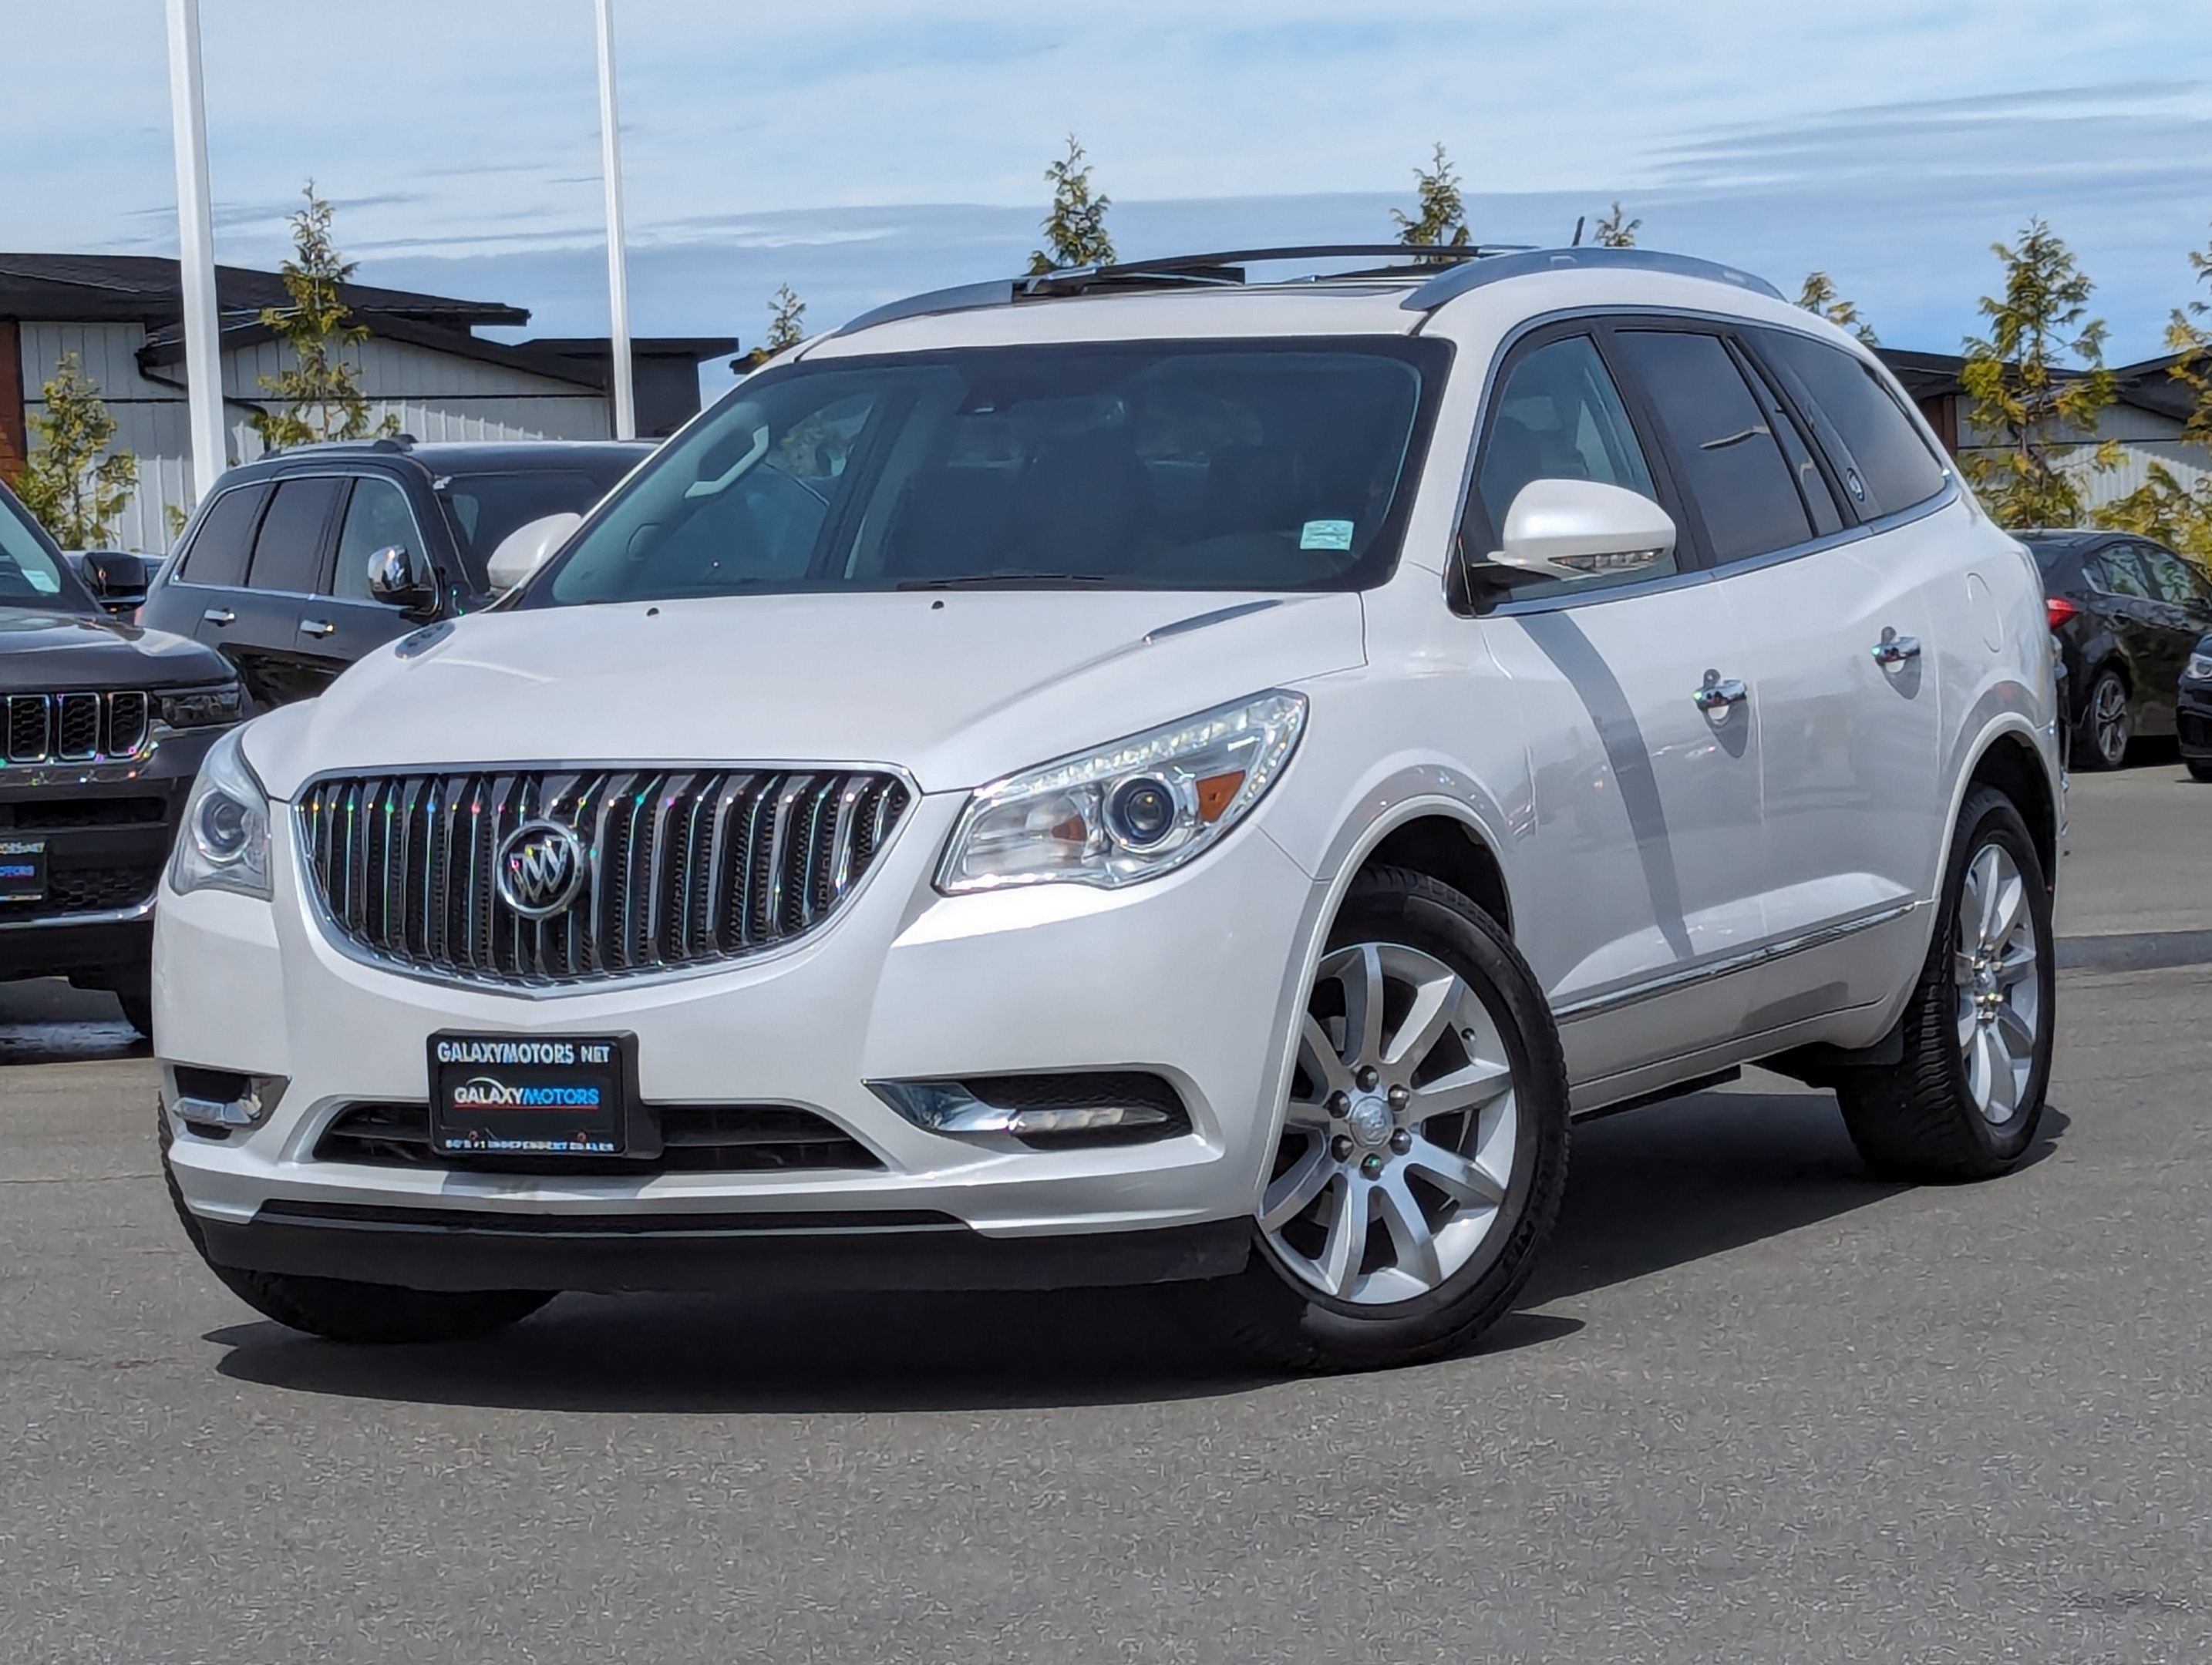 2017 Buick Enclave Premium - No Accidents, Sunroof, NAV, Heated Seats